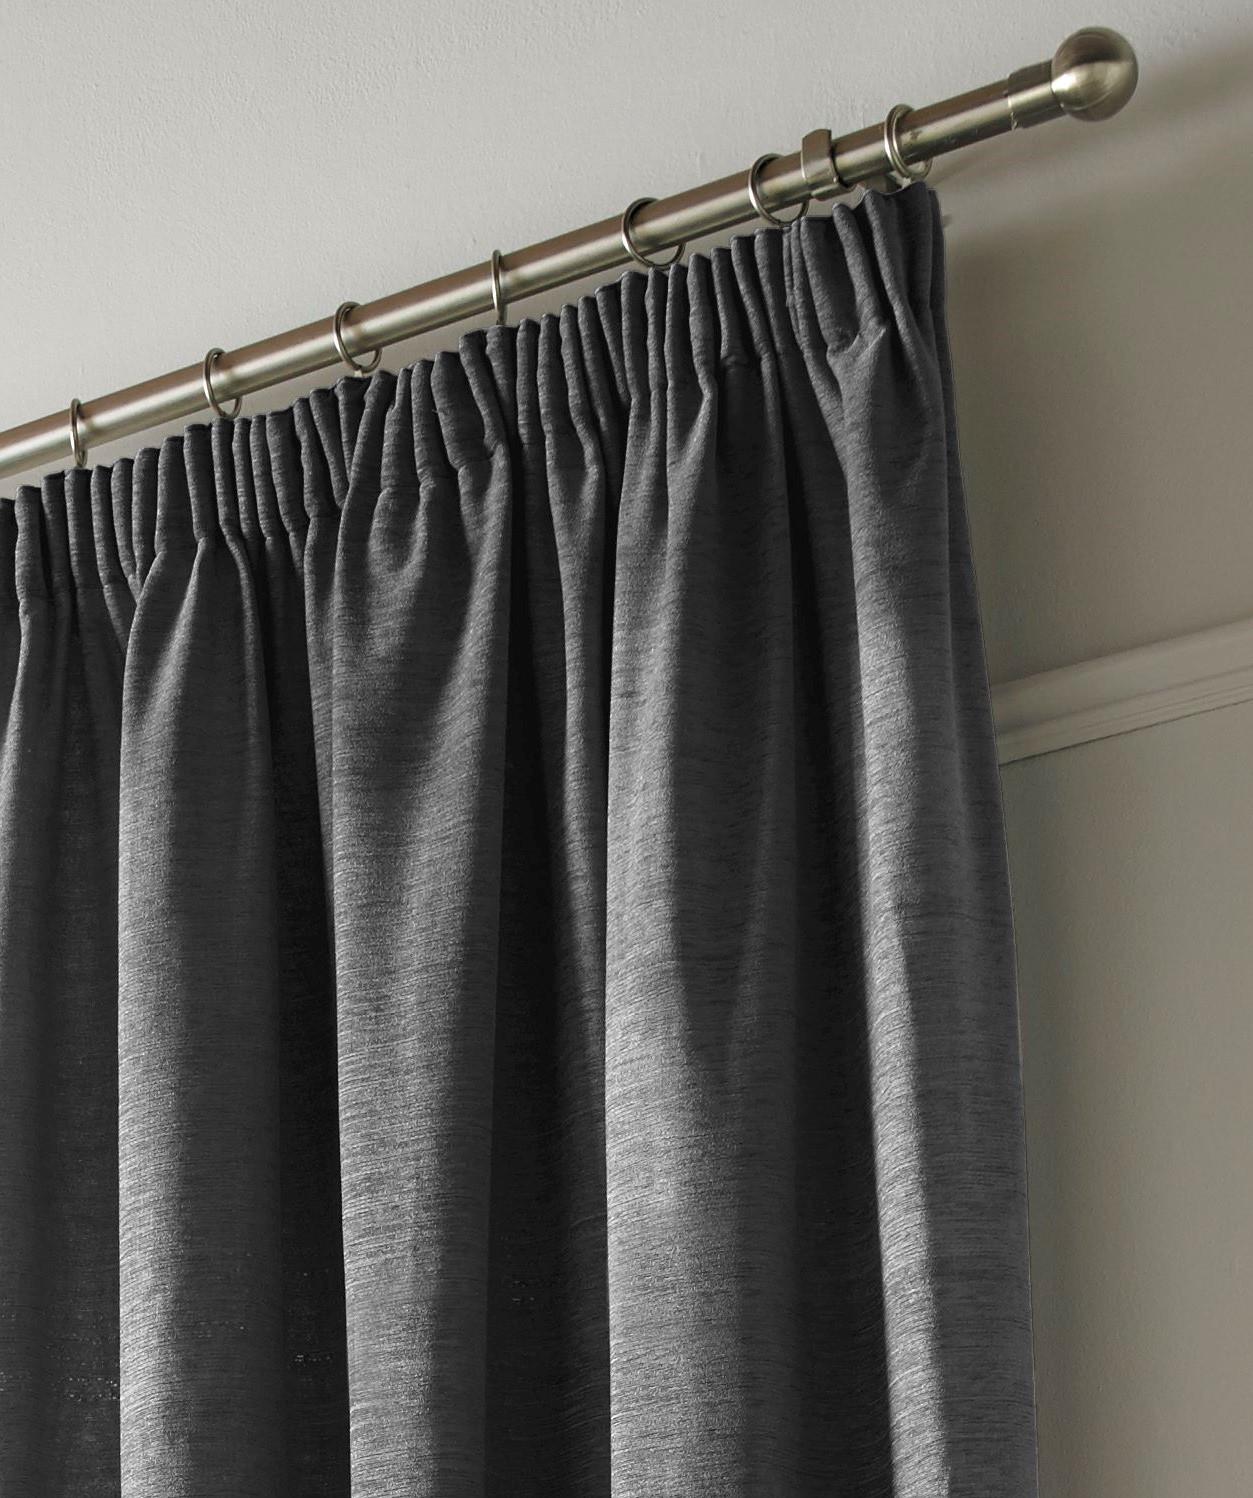 Charcoal Plain Chenille Fully Lined Pencil Pleat Curtains Pair